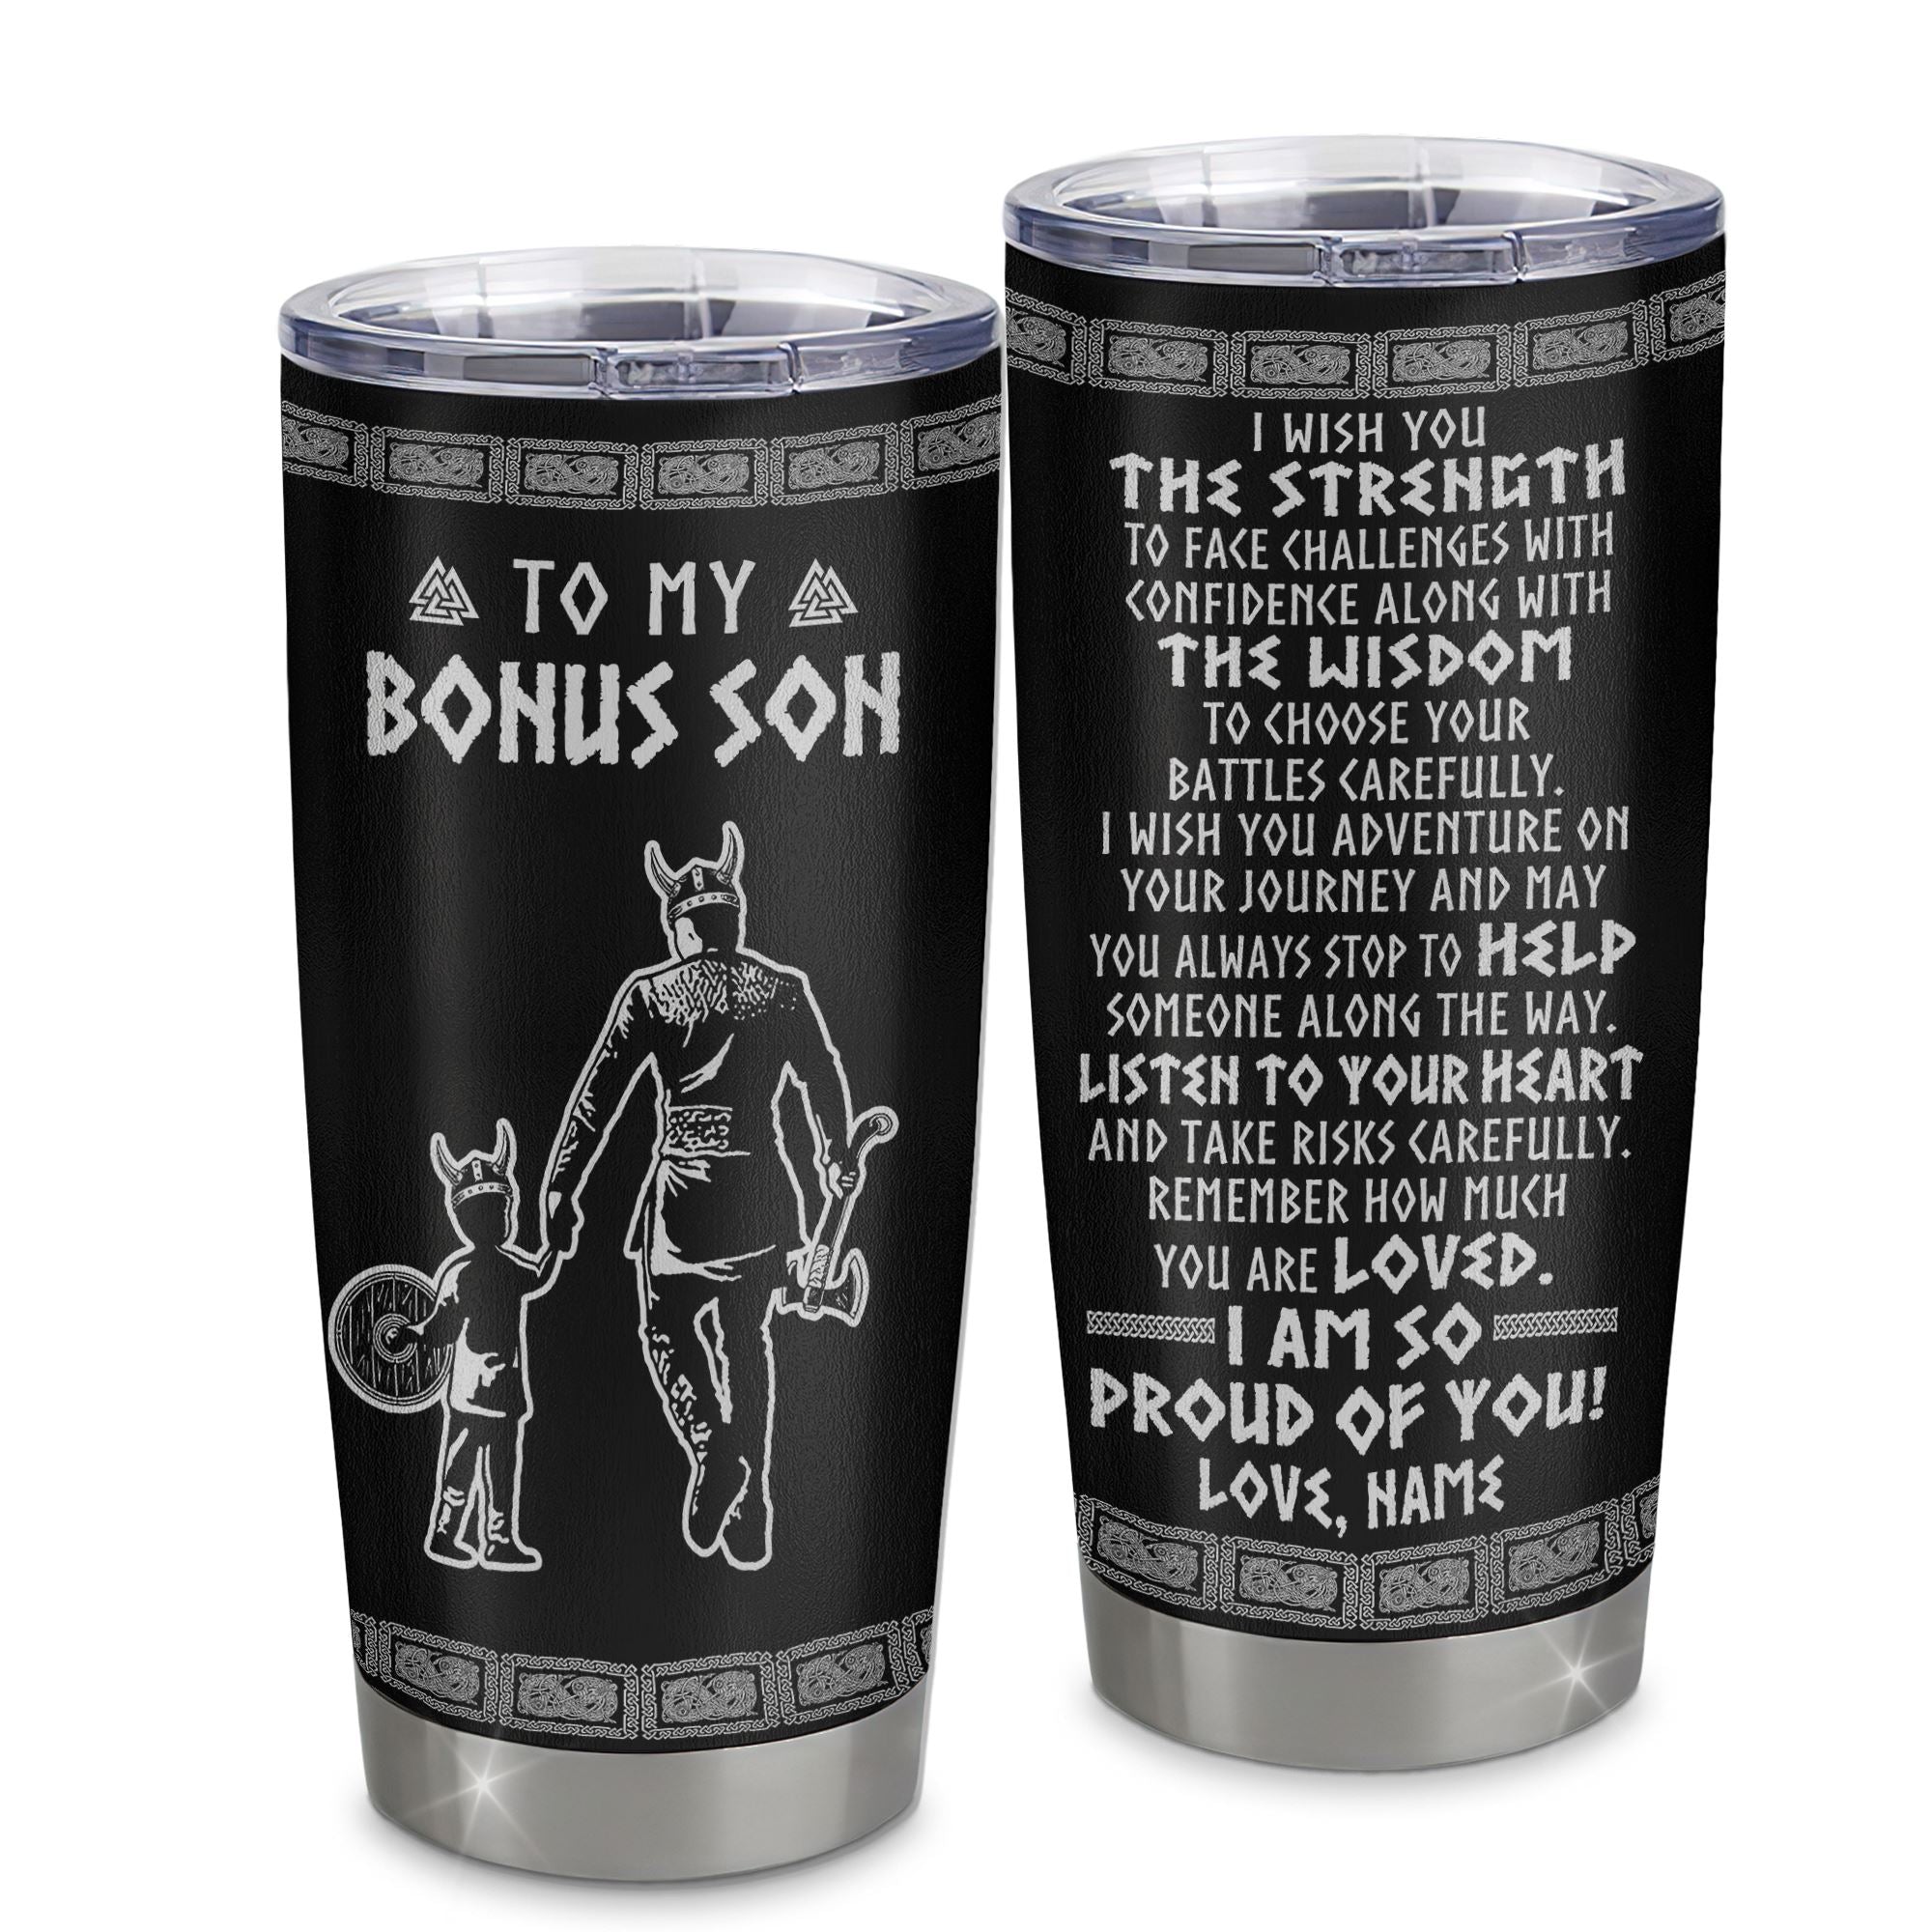 Personalized_To_My_Bonus_Son_Viking_Tumbler_From_Stepfather_Stainless_Steel_Cup_I_Am_So_Proud_Of_You_Runes_Viking_Stepson_Birthday_Christmas_Travel_Mug_Tumbler_mockup_1.jpg